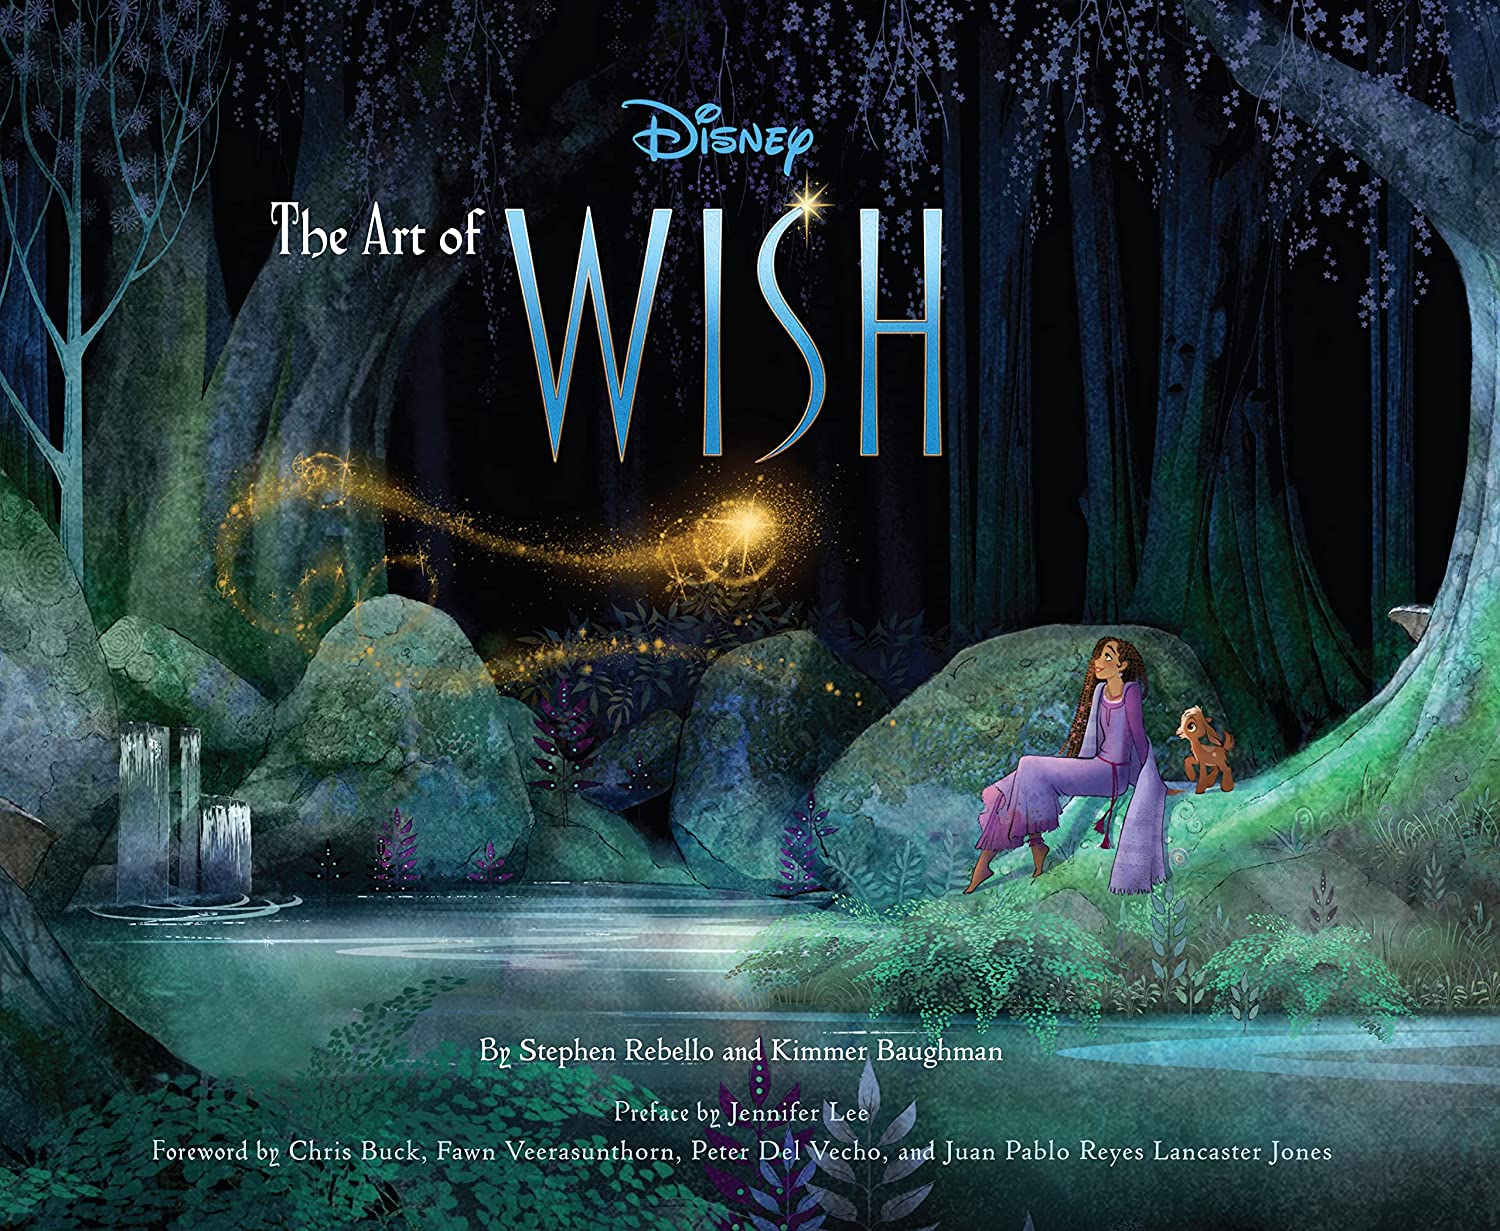 Kids Can Go to Rosas with Disney 'Wish' Books - The Toy Insider